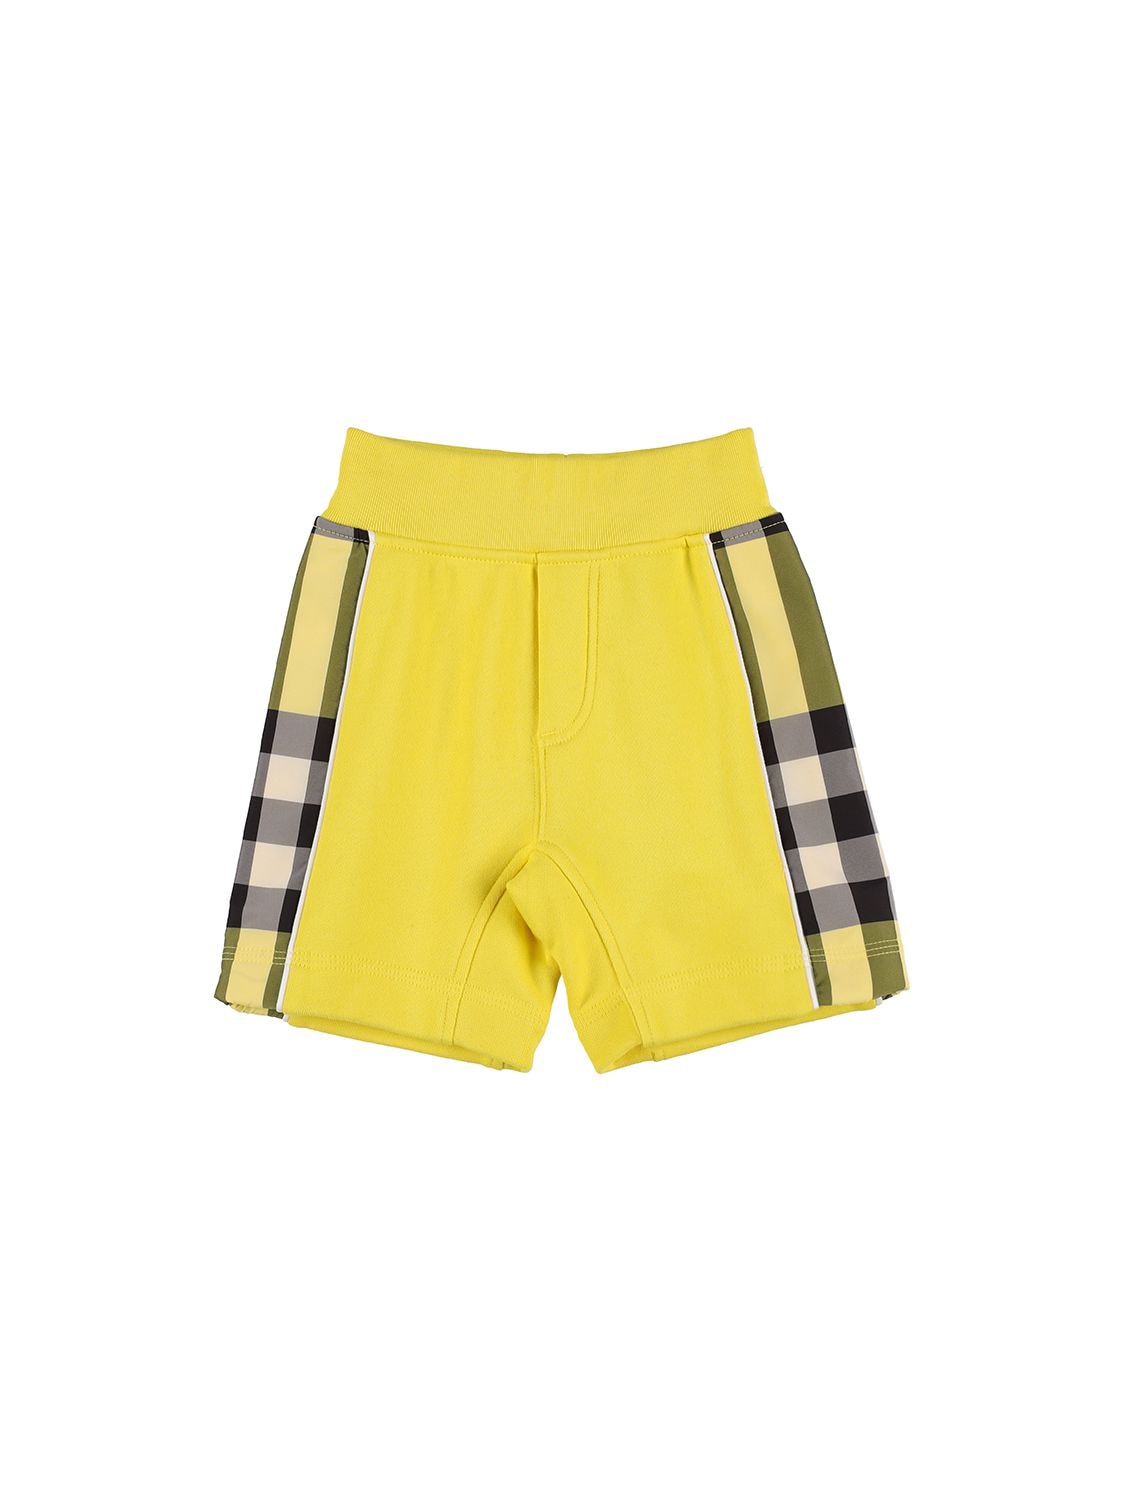 BURBERRY COTTON SHORTS W/ CHECK INSERTS